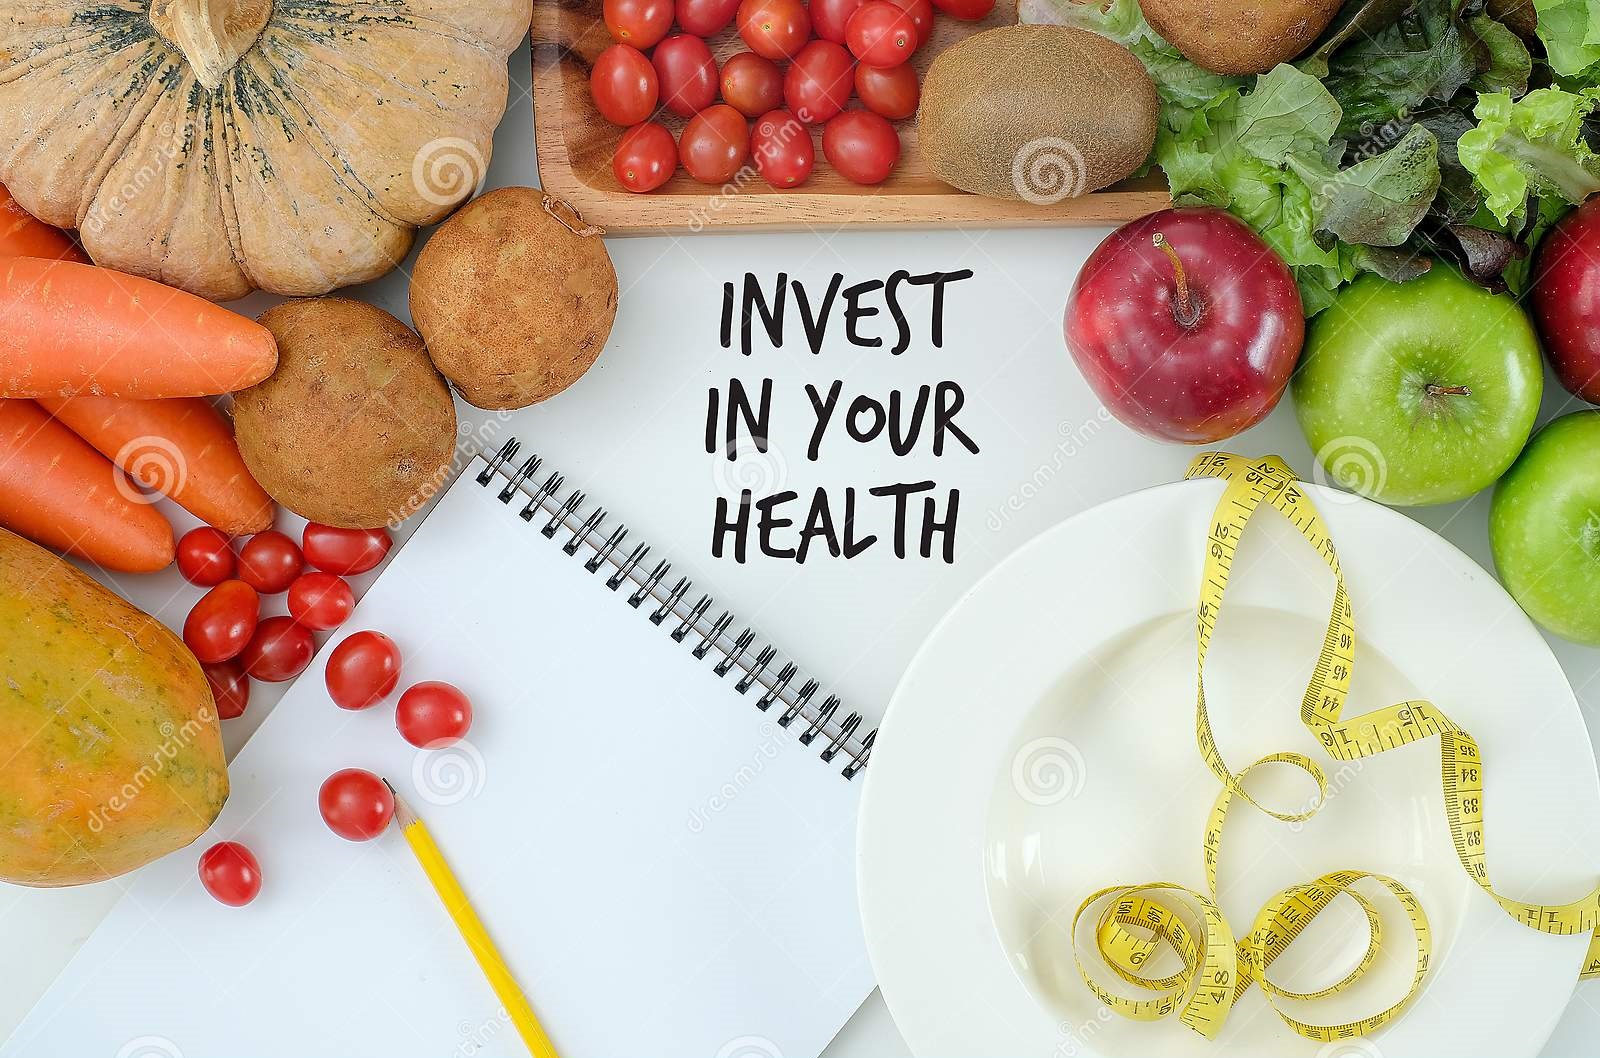 invest-your-health-healthy-lifestyle-concept-diet-fitness-get-fit-fitness-equipment-healthy-food-invest-your-158227197